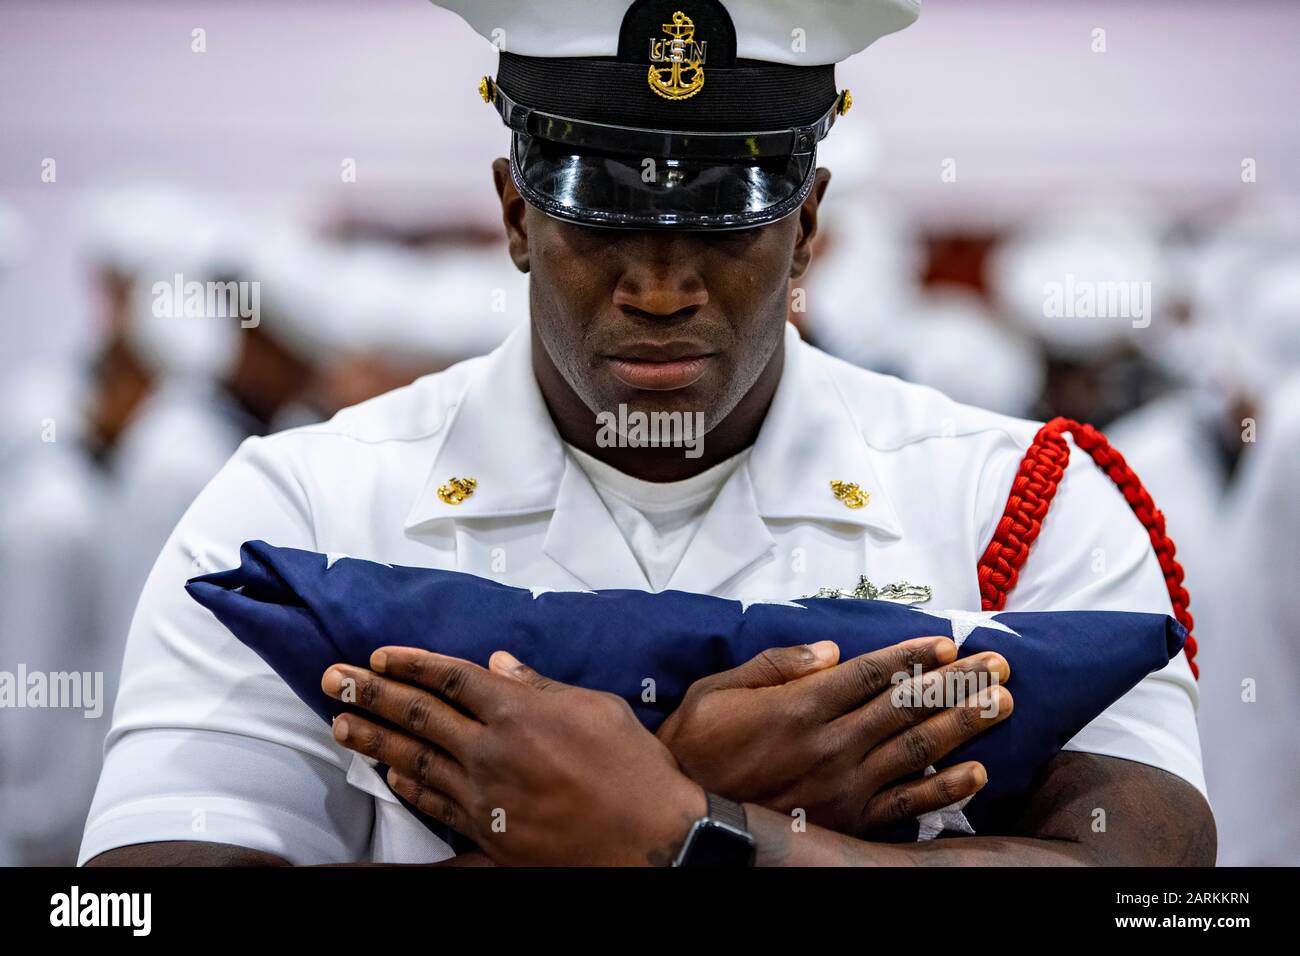 190906-N-PL946-1213 GREAT LAKES, Ill. (Sep. 6, 2019) Chief Fire Controlman (Aegis) Daniel Rainmaker, a recruit division commander, holds the American flag before a flag presentation ceremony in remembrance of 9/11 during a pass-in-review graduation ceremony at Recruit Training Command (RTC). RTC presented the flag to Kenneth Corrigan, a Navy veteran and first responder to the 9/11 attacks on the World Trade Center. More than 35,000 recruits train annually at the Navy's only boot camp. (U.S. Navy photo by Mass Communication Specialist 1st Class Spencer Fling) Stock Photo